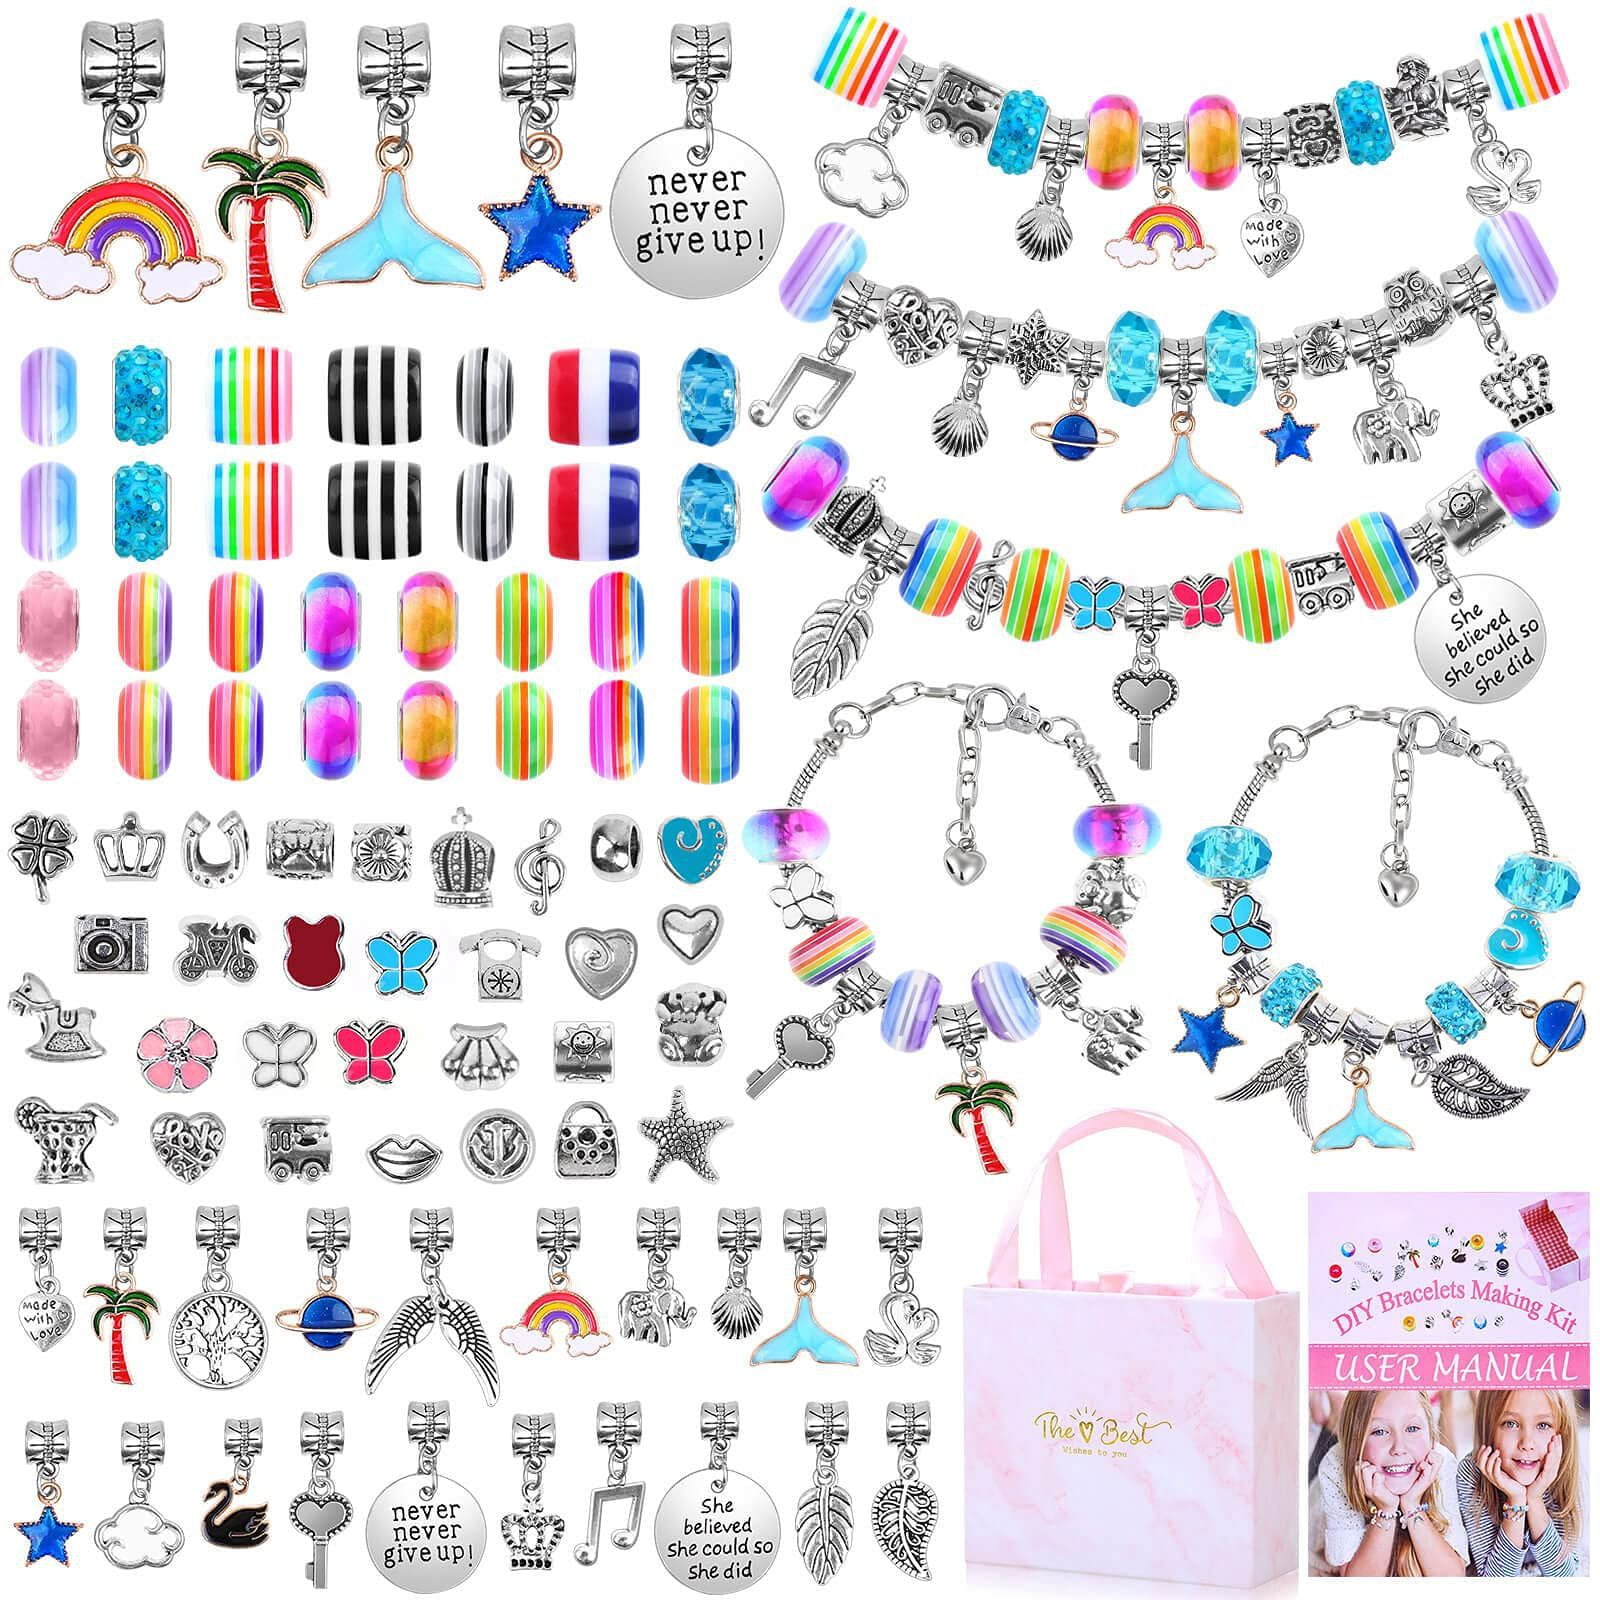 Charm Bracelet Making Kit, Crystal Jewelry Making Supplies Beads,  Unicorn/Mermaid Crafts Gifts Set for Girls Teens Age 8-12